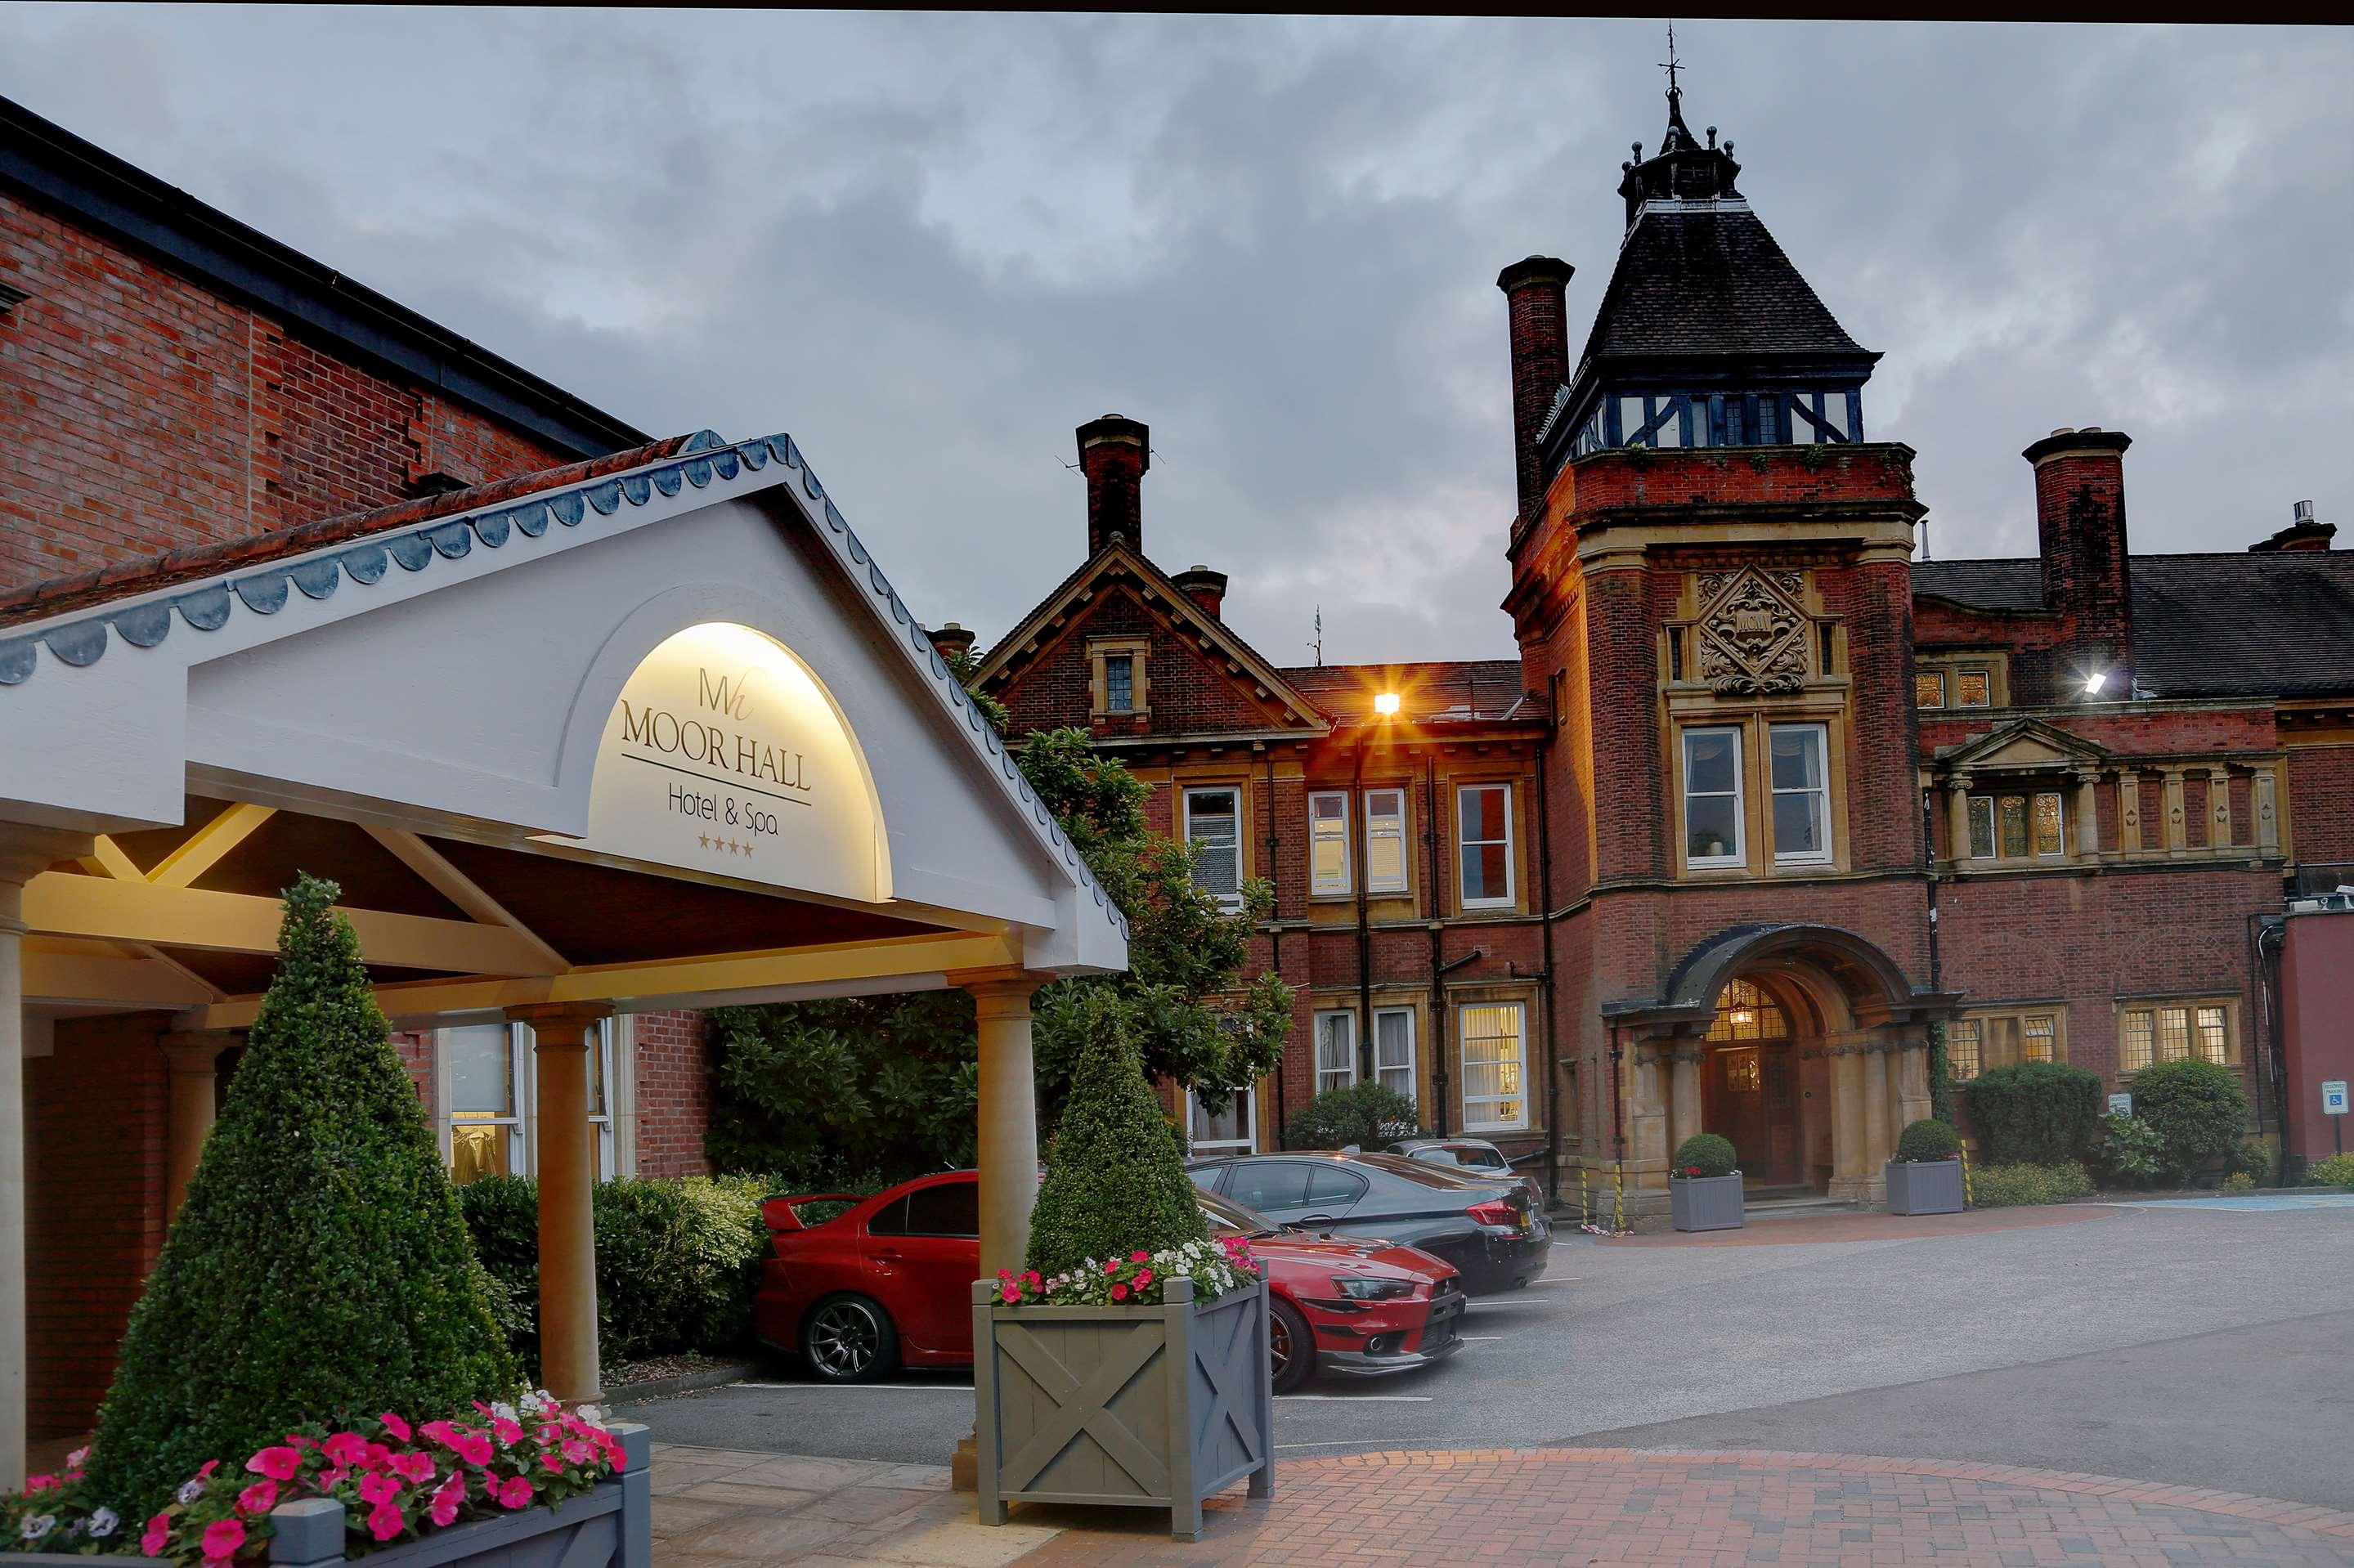 16 Best Hotels in West Bromwich. Hotel Deals from £53/night - KAYAK